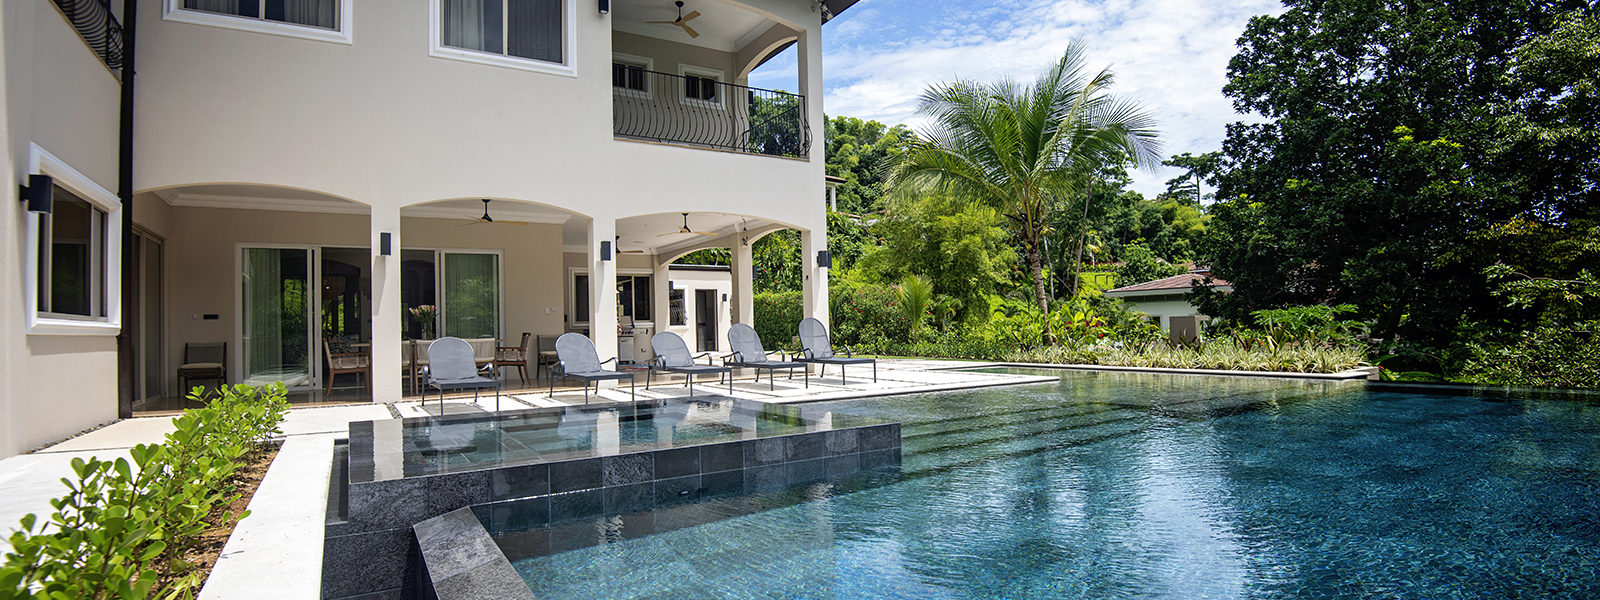 Our modern pool and lounge area seamlessly blend with the surrounding rainforest